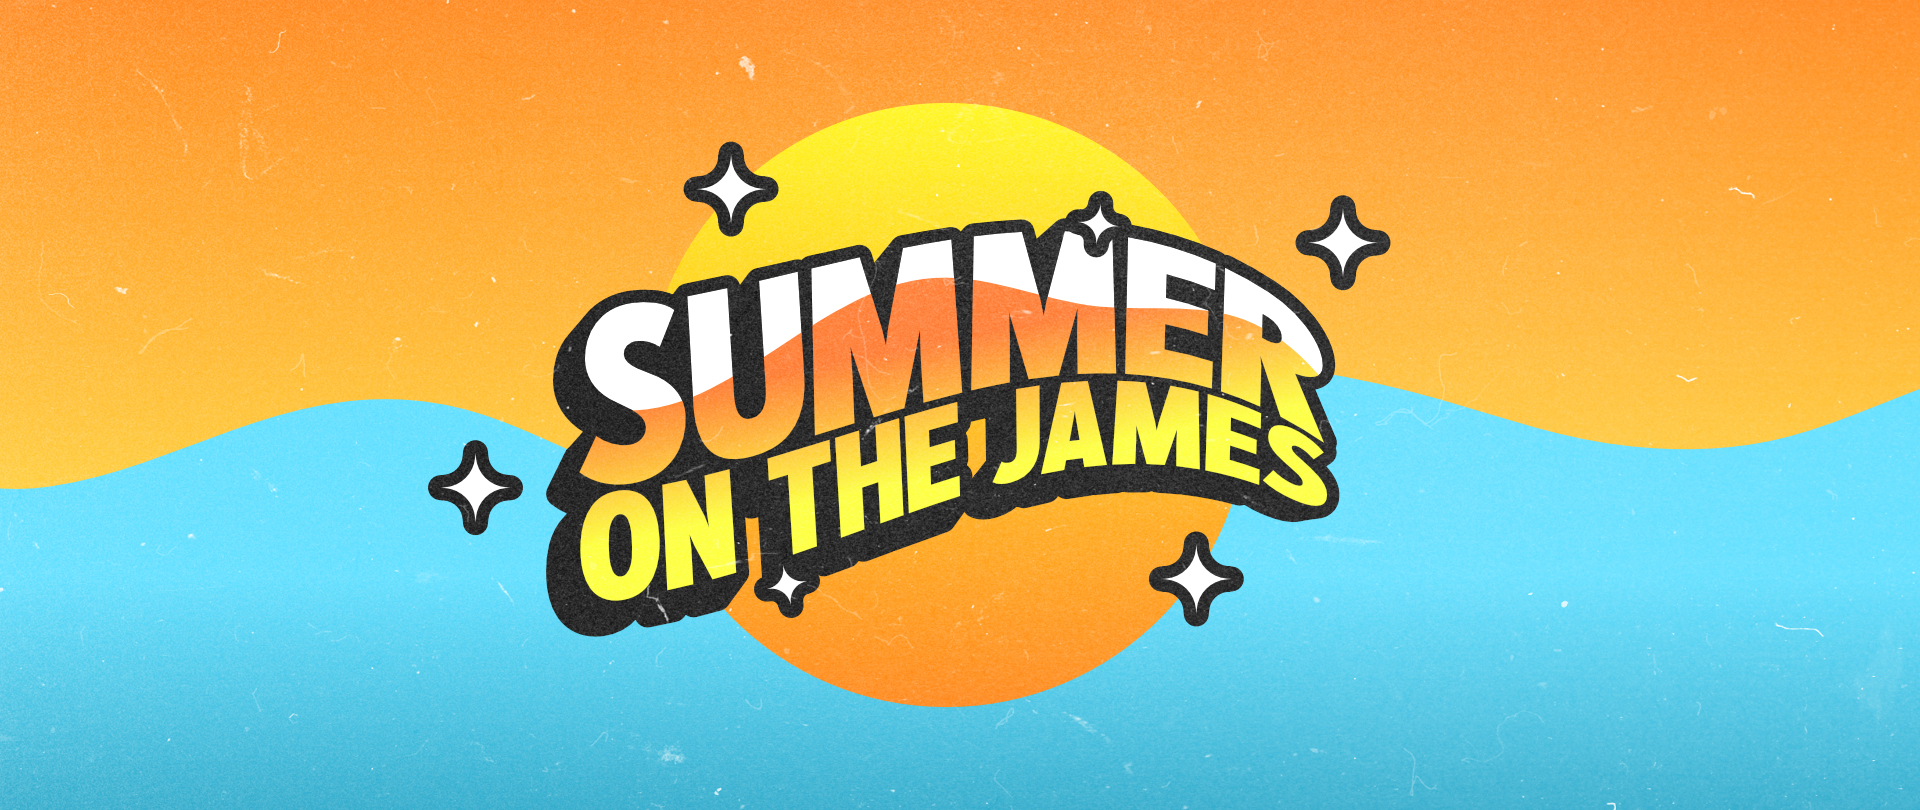 summer-on-the-james-1920x810